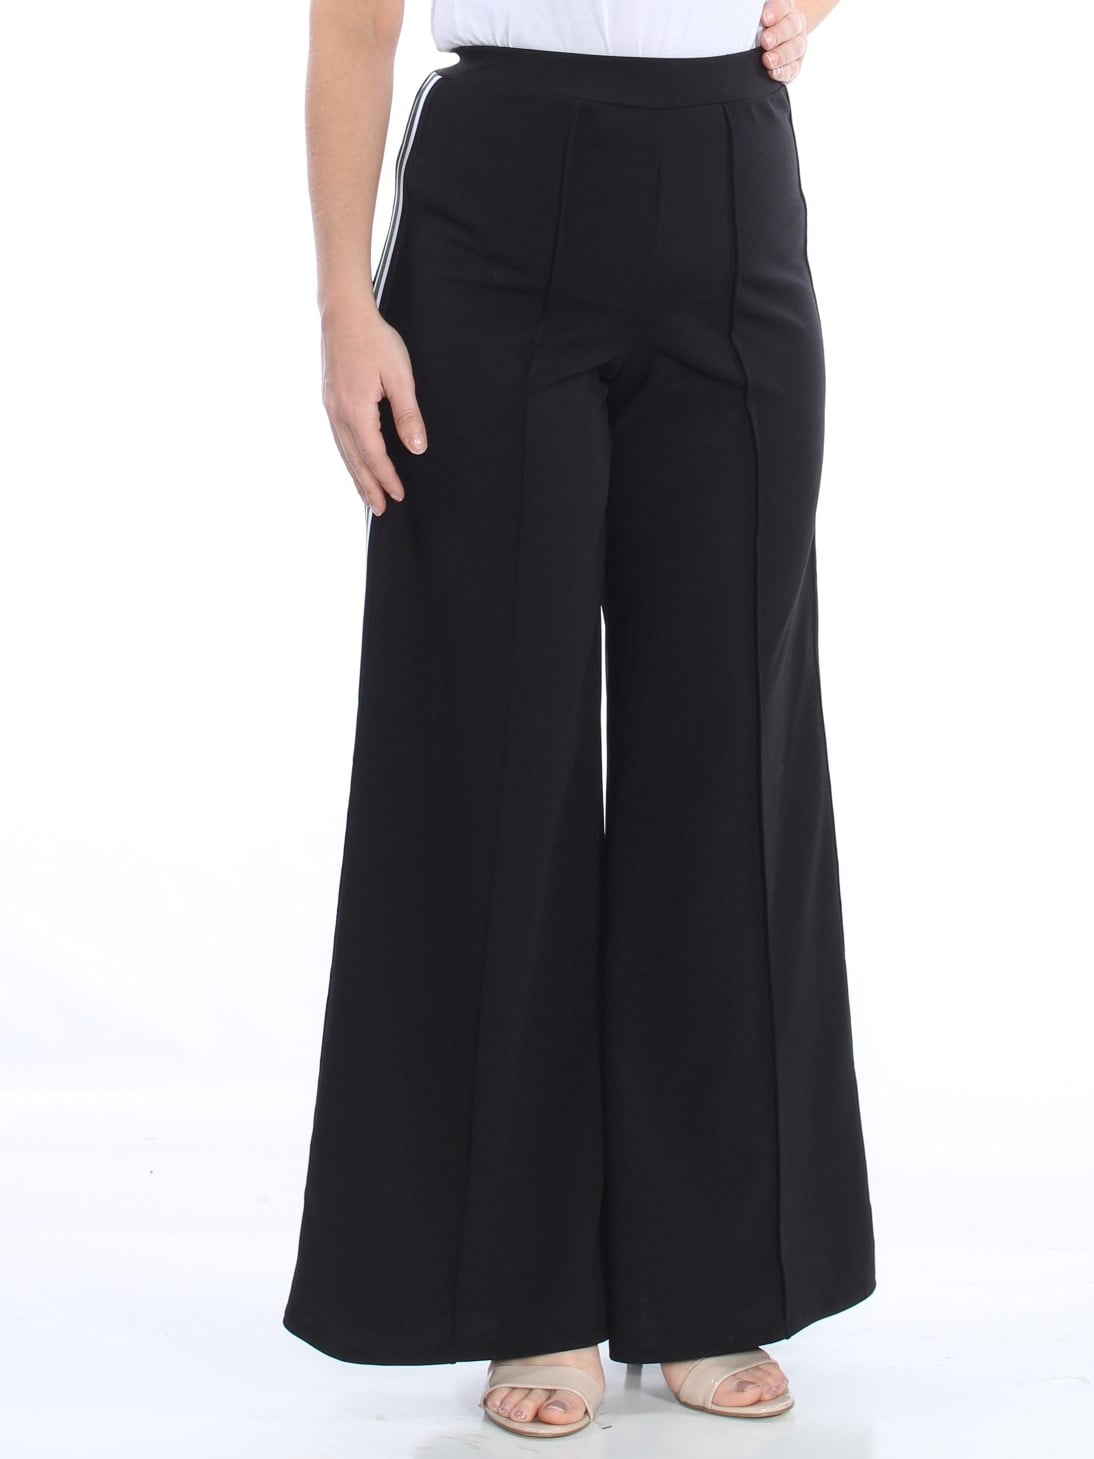  High Waisted Elegant Pleated Pants for Women Slim Fit